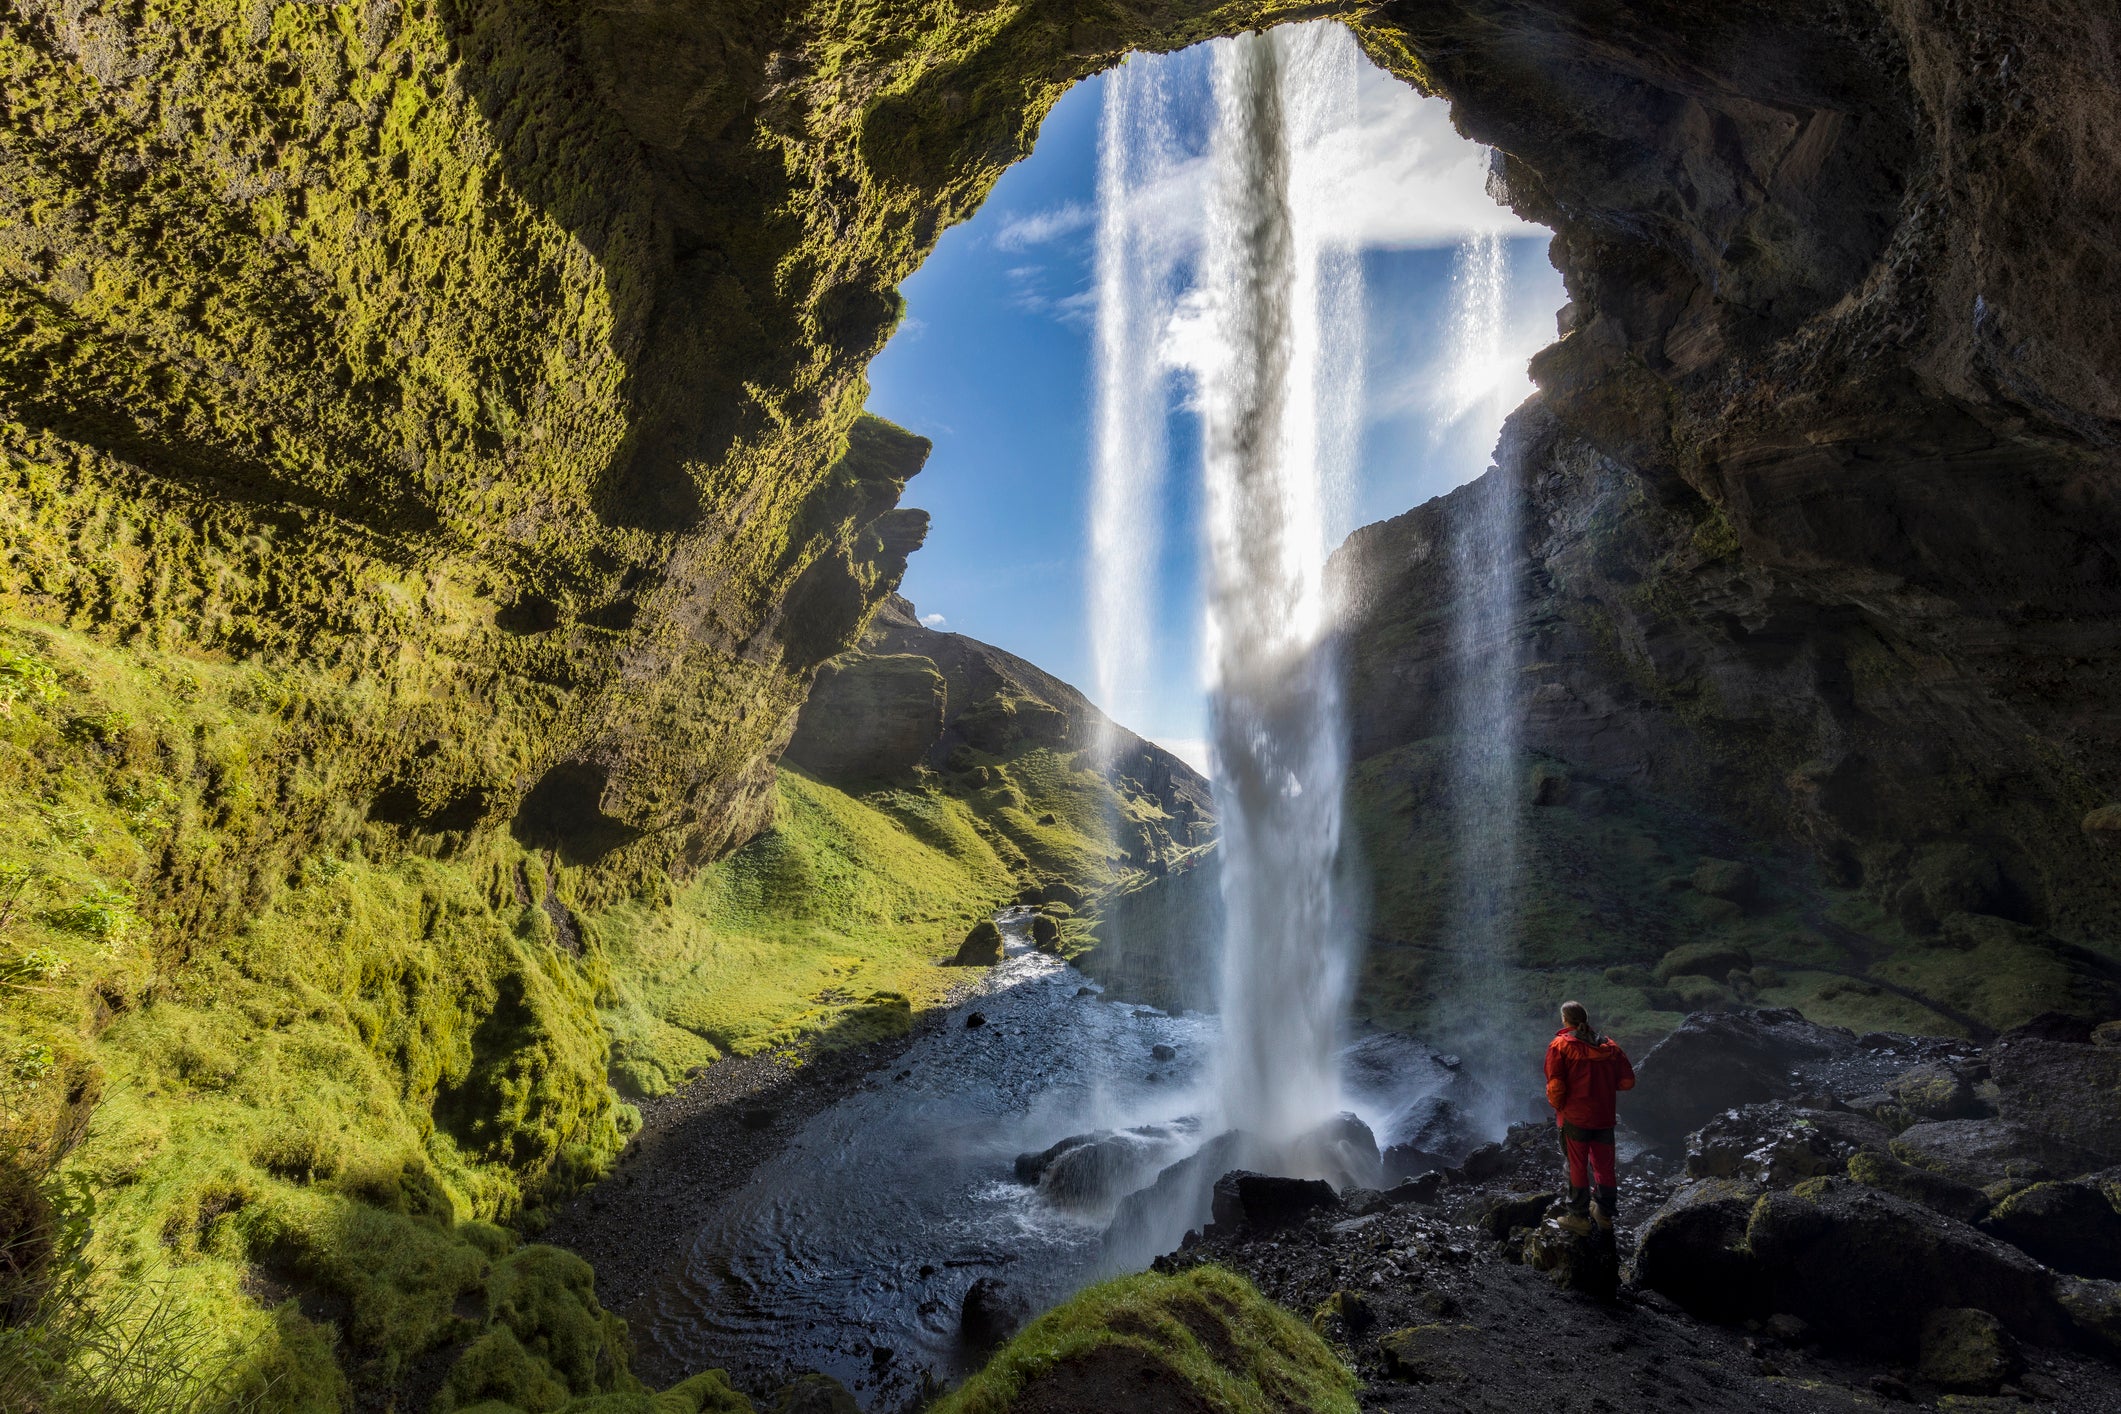 Find waterfalls, glaciers and hot springs on singles tours in Iceland